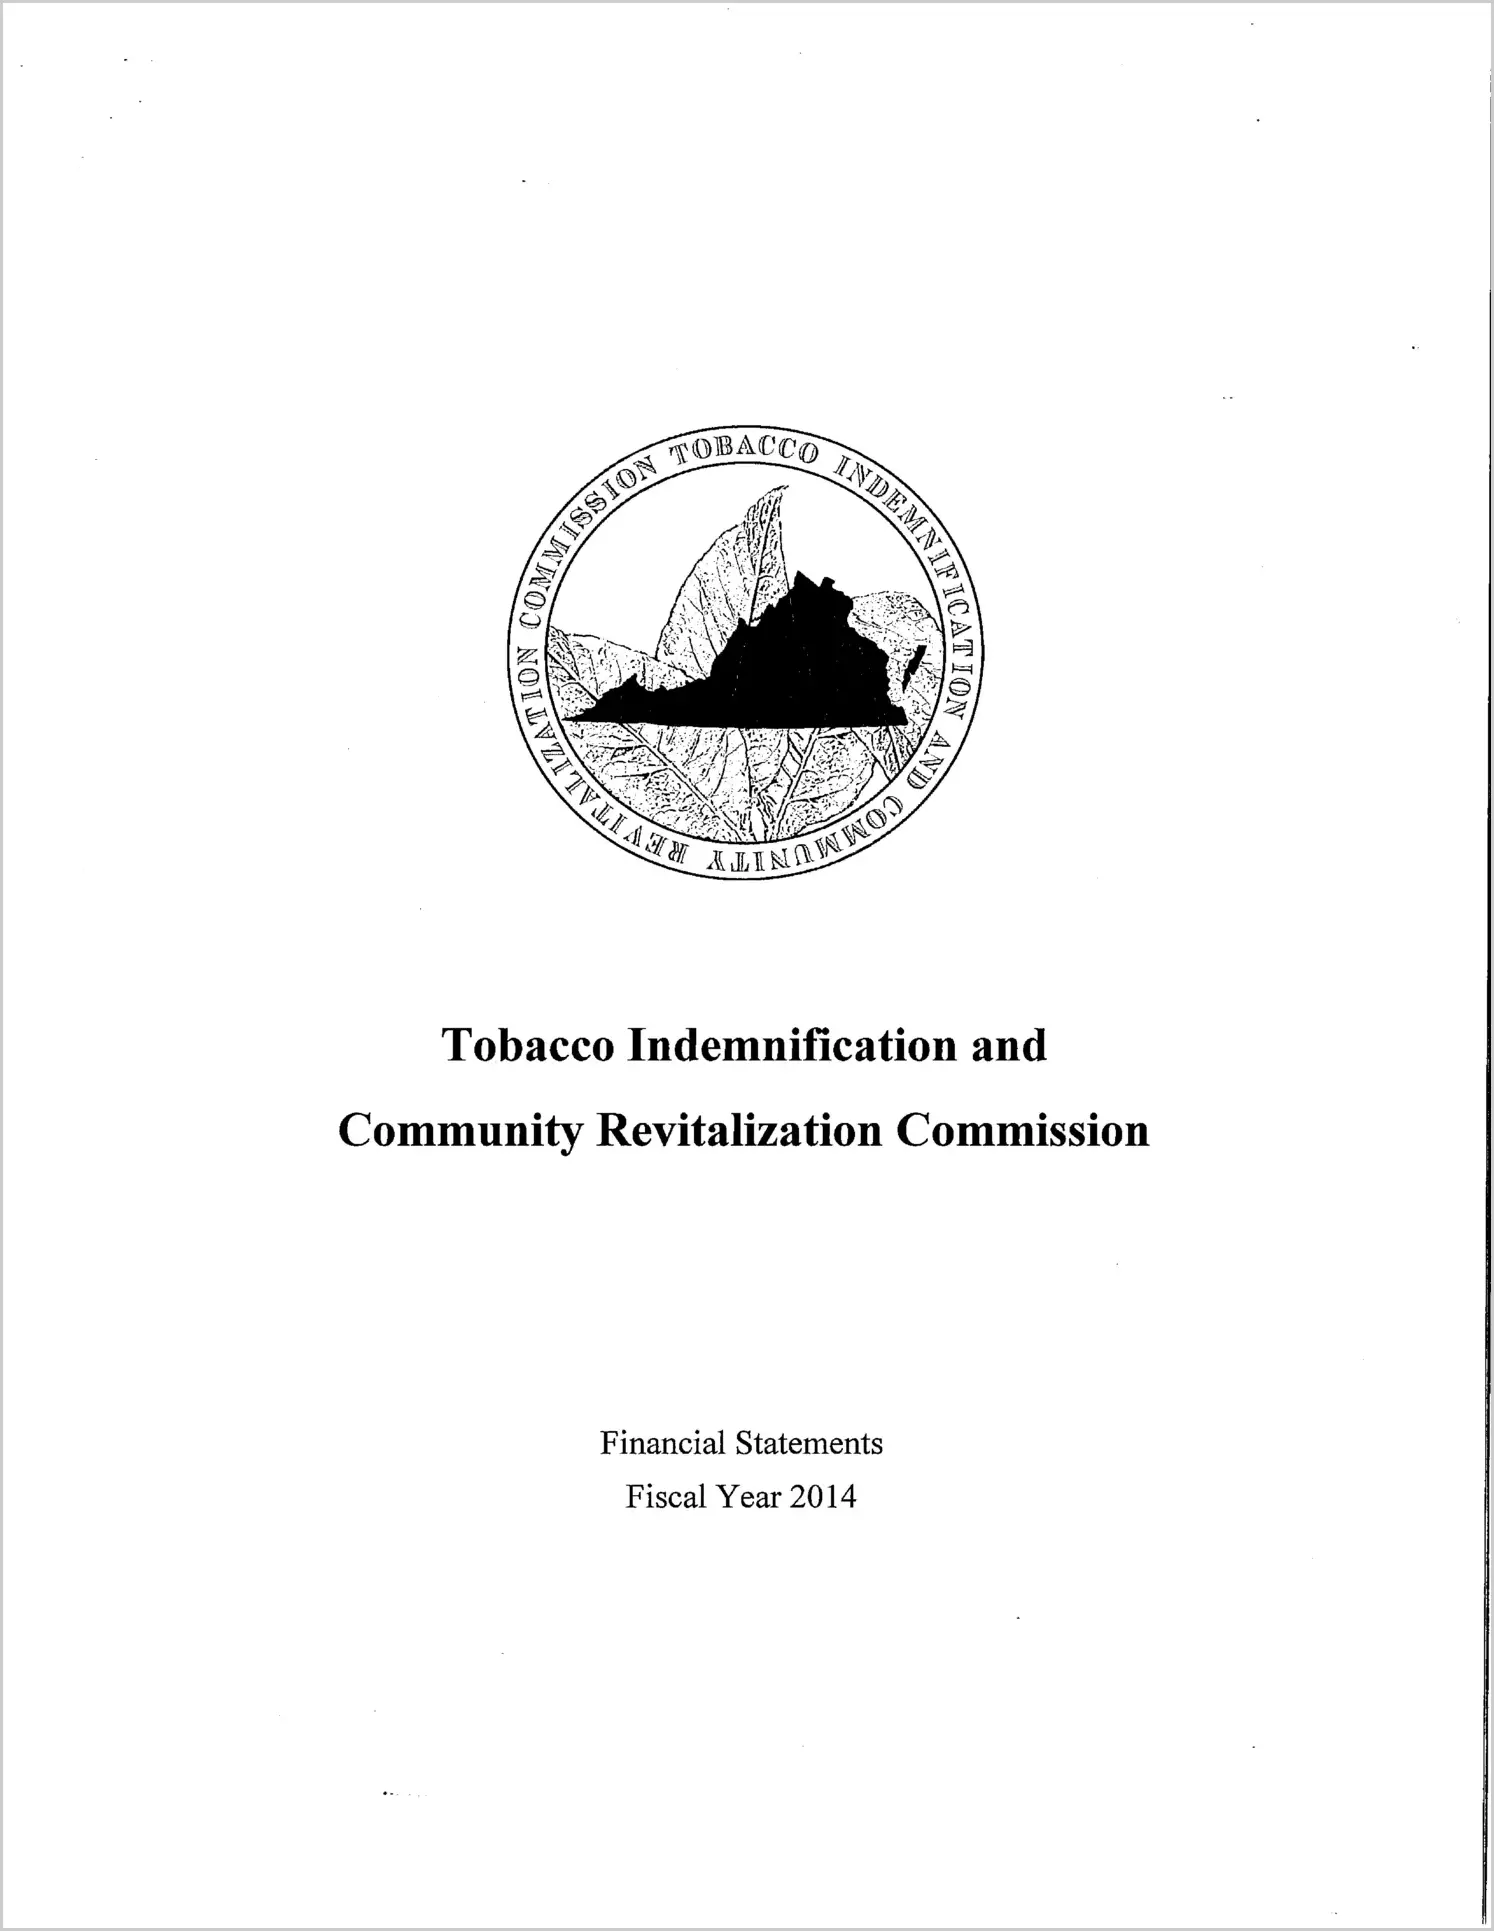 Tobacco Indemnification and Community Revitalization Commission Financial Statement for the year ended June 30, 2014